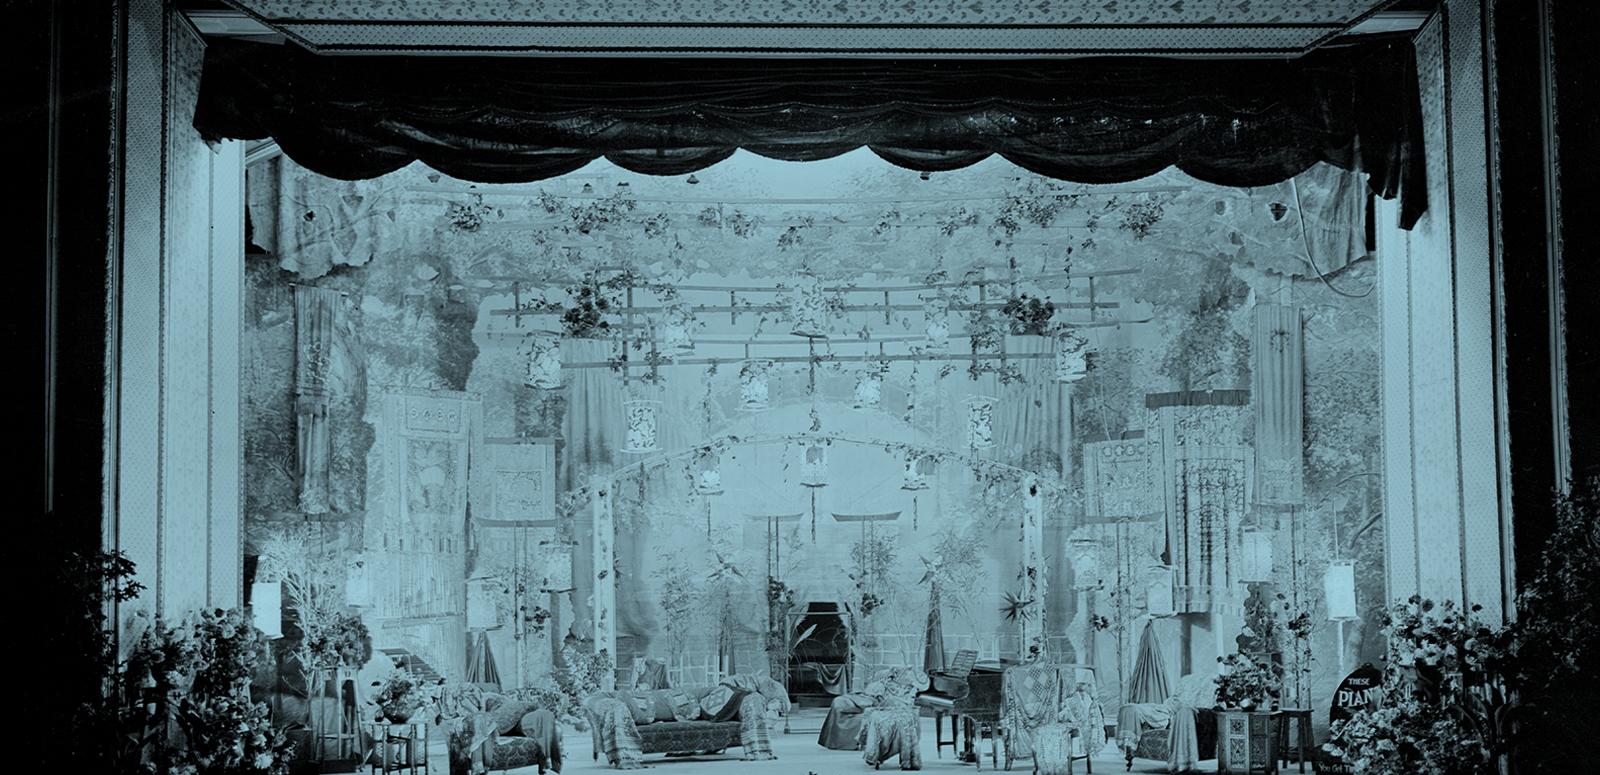 A tinted image of an early 20th century stage before a Corricks family musical performance. It features a piano, an array of chairs and armchairs for the performers, and decorative flowers both on the stage and suspended above it.